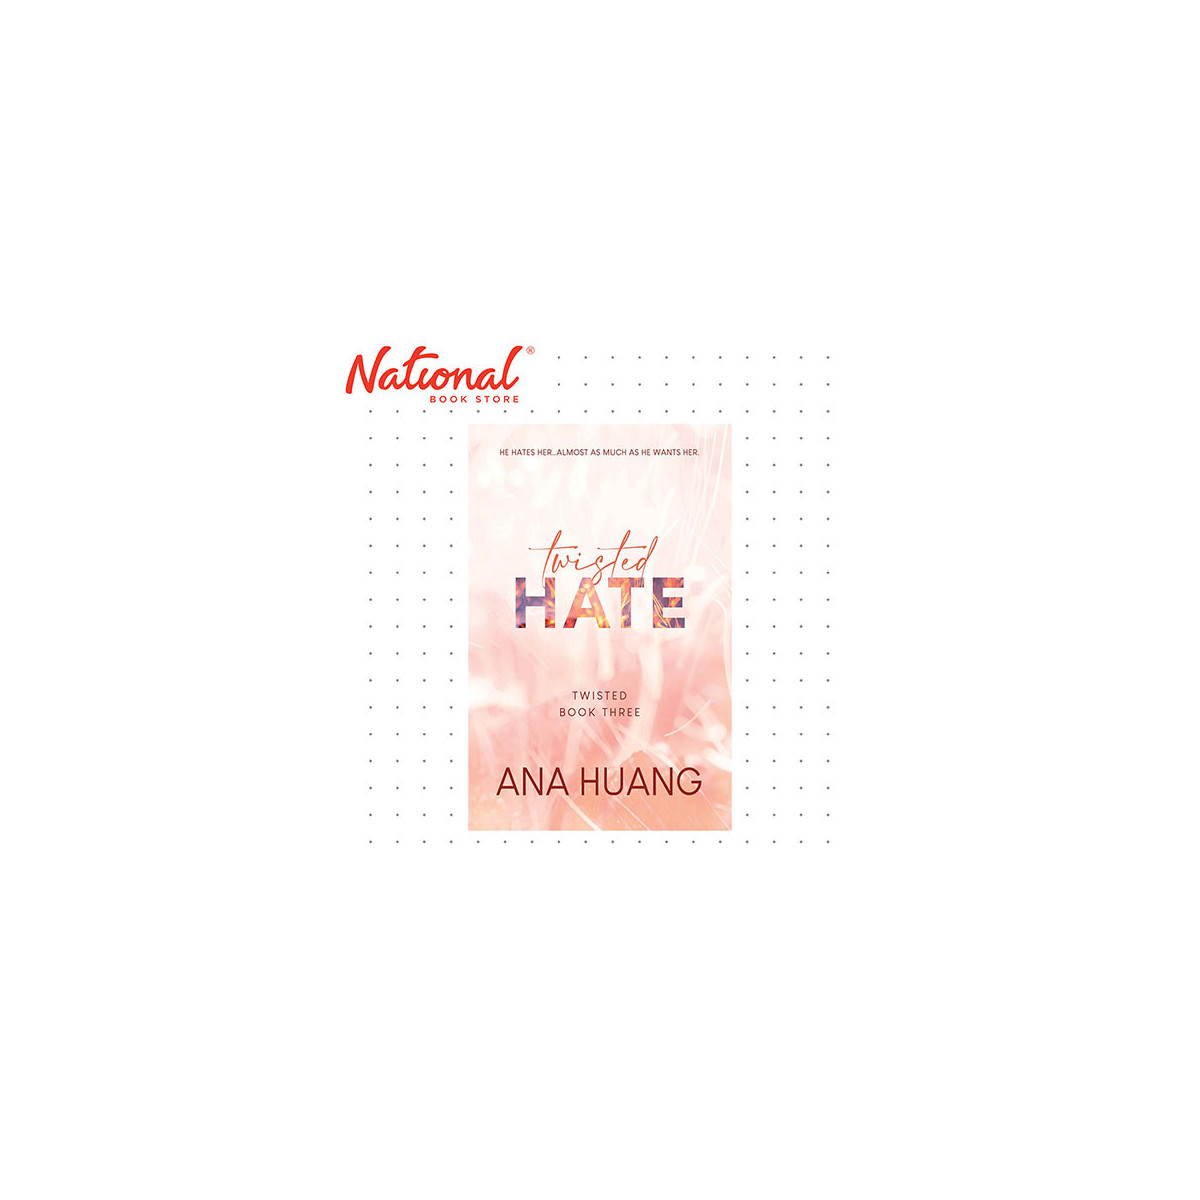 TWISTED HATE BY ANA HUANG - TRADE PAPERBACK - ROMANCE